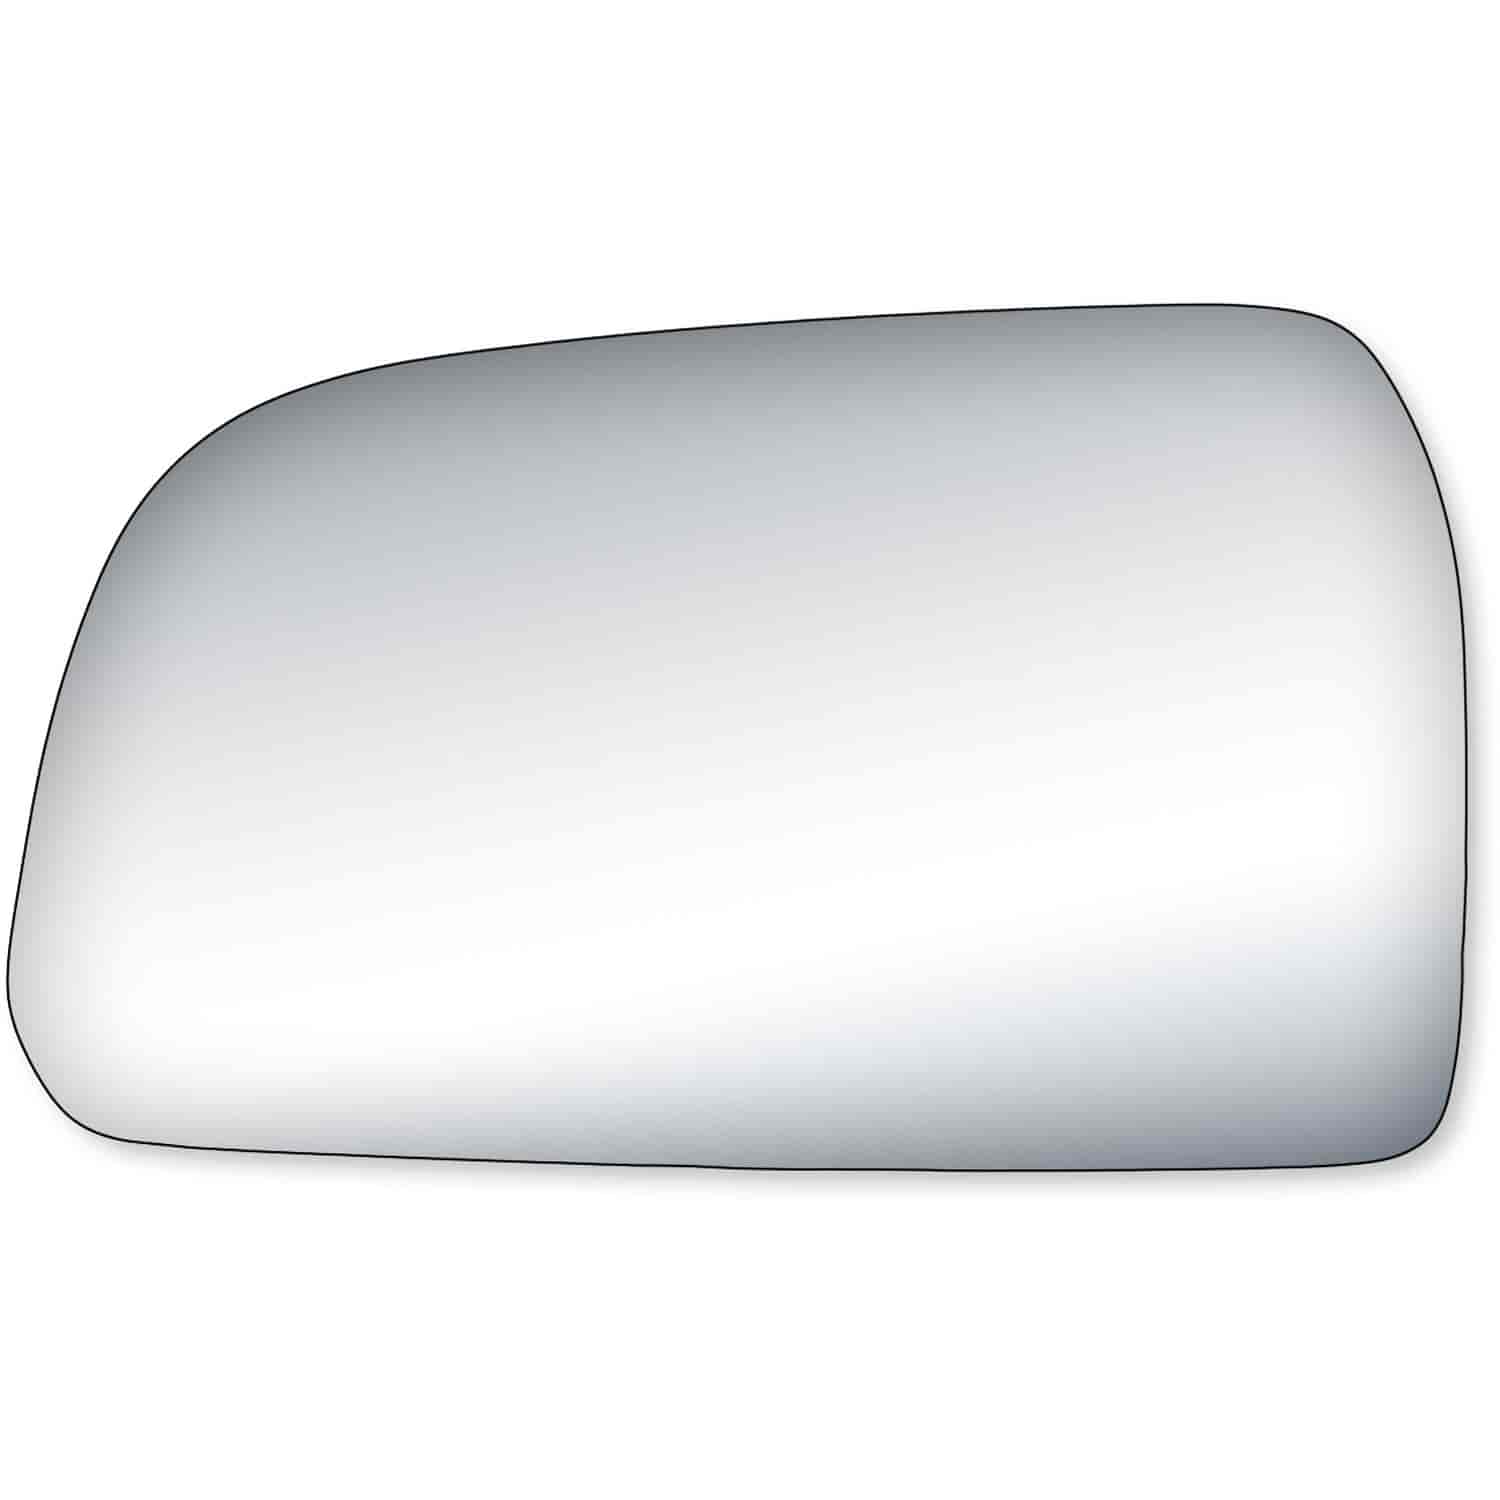 Replacement Glass for 05-10 Tucson the glass measures 4 3/8 tall by 7 3/8 wide and 7 7/8 diagonally